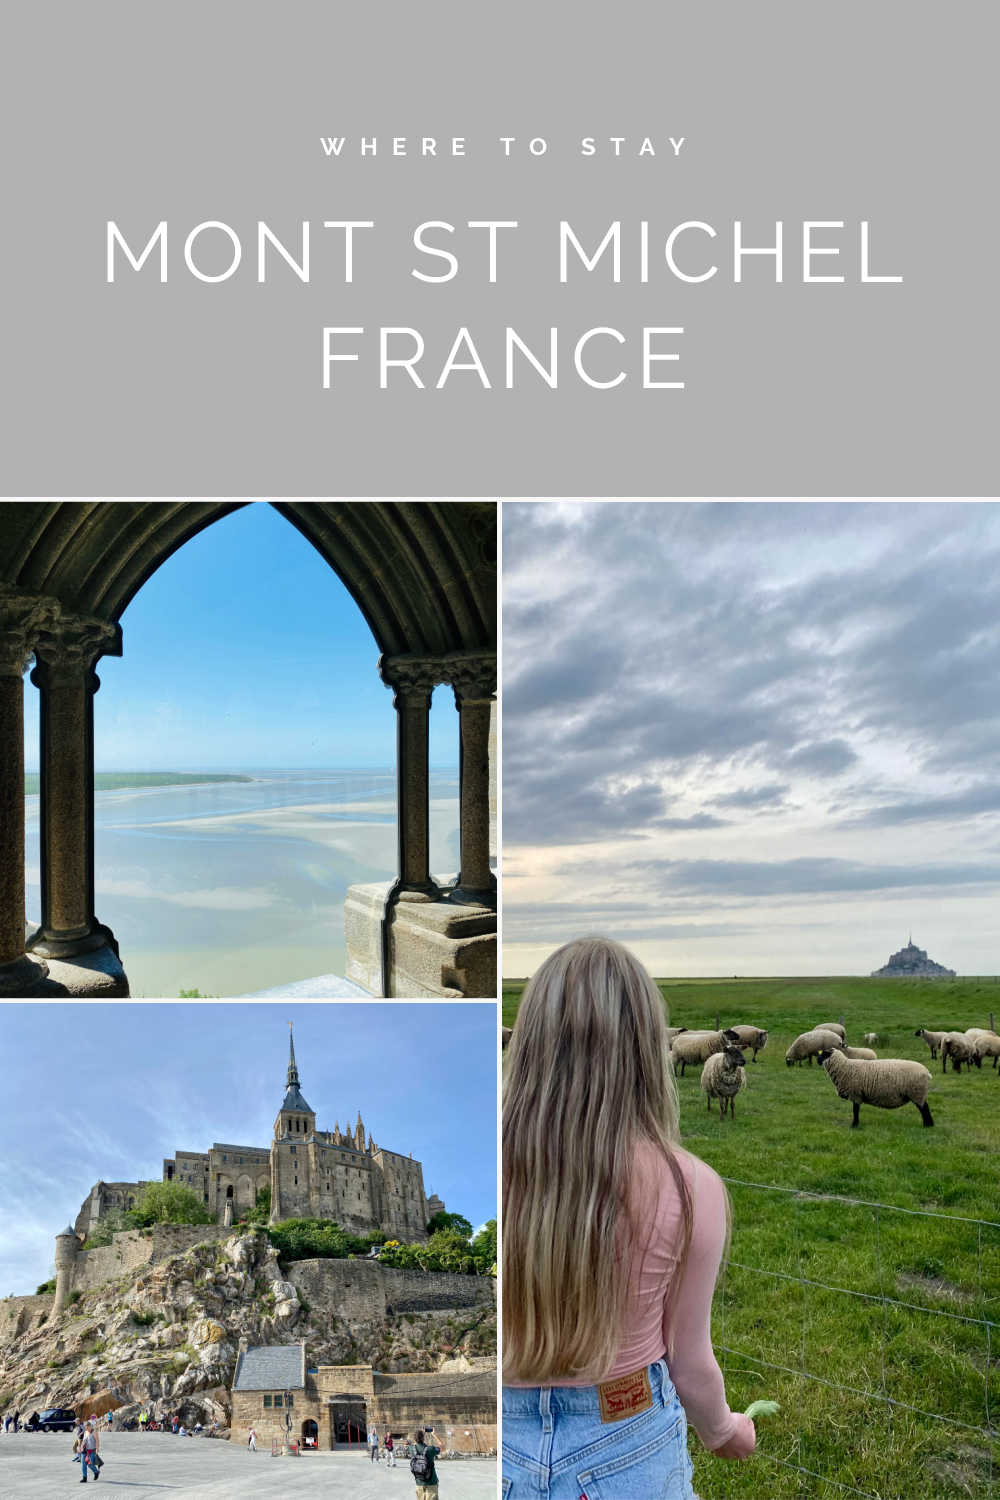 MONT ST MICHEL WHERE TO STAY